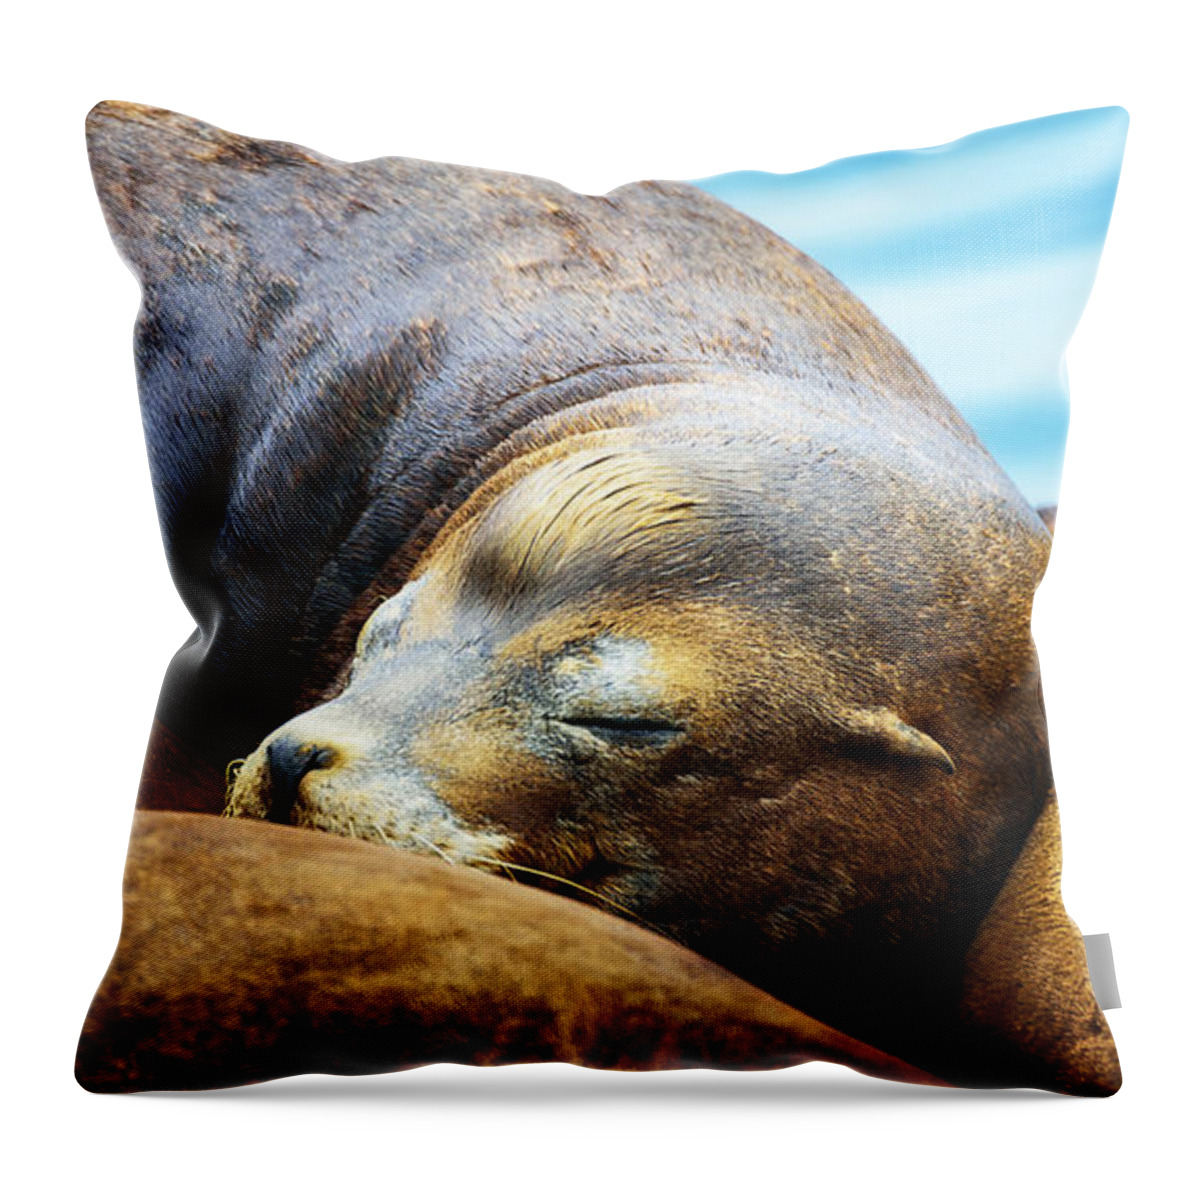 Seal Throw Pillow featuring the photograph Resting by Camille Lopez